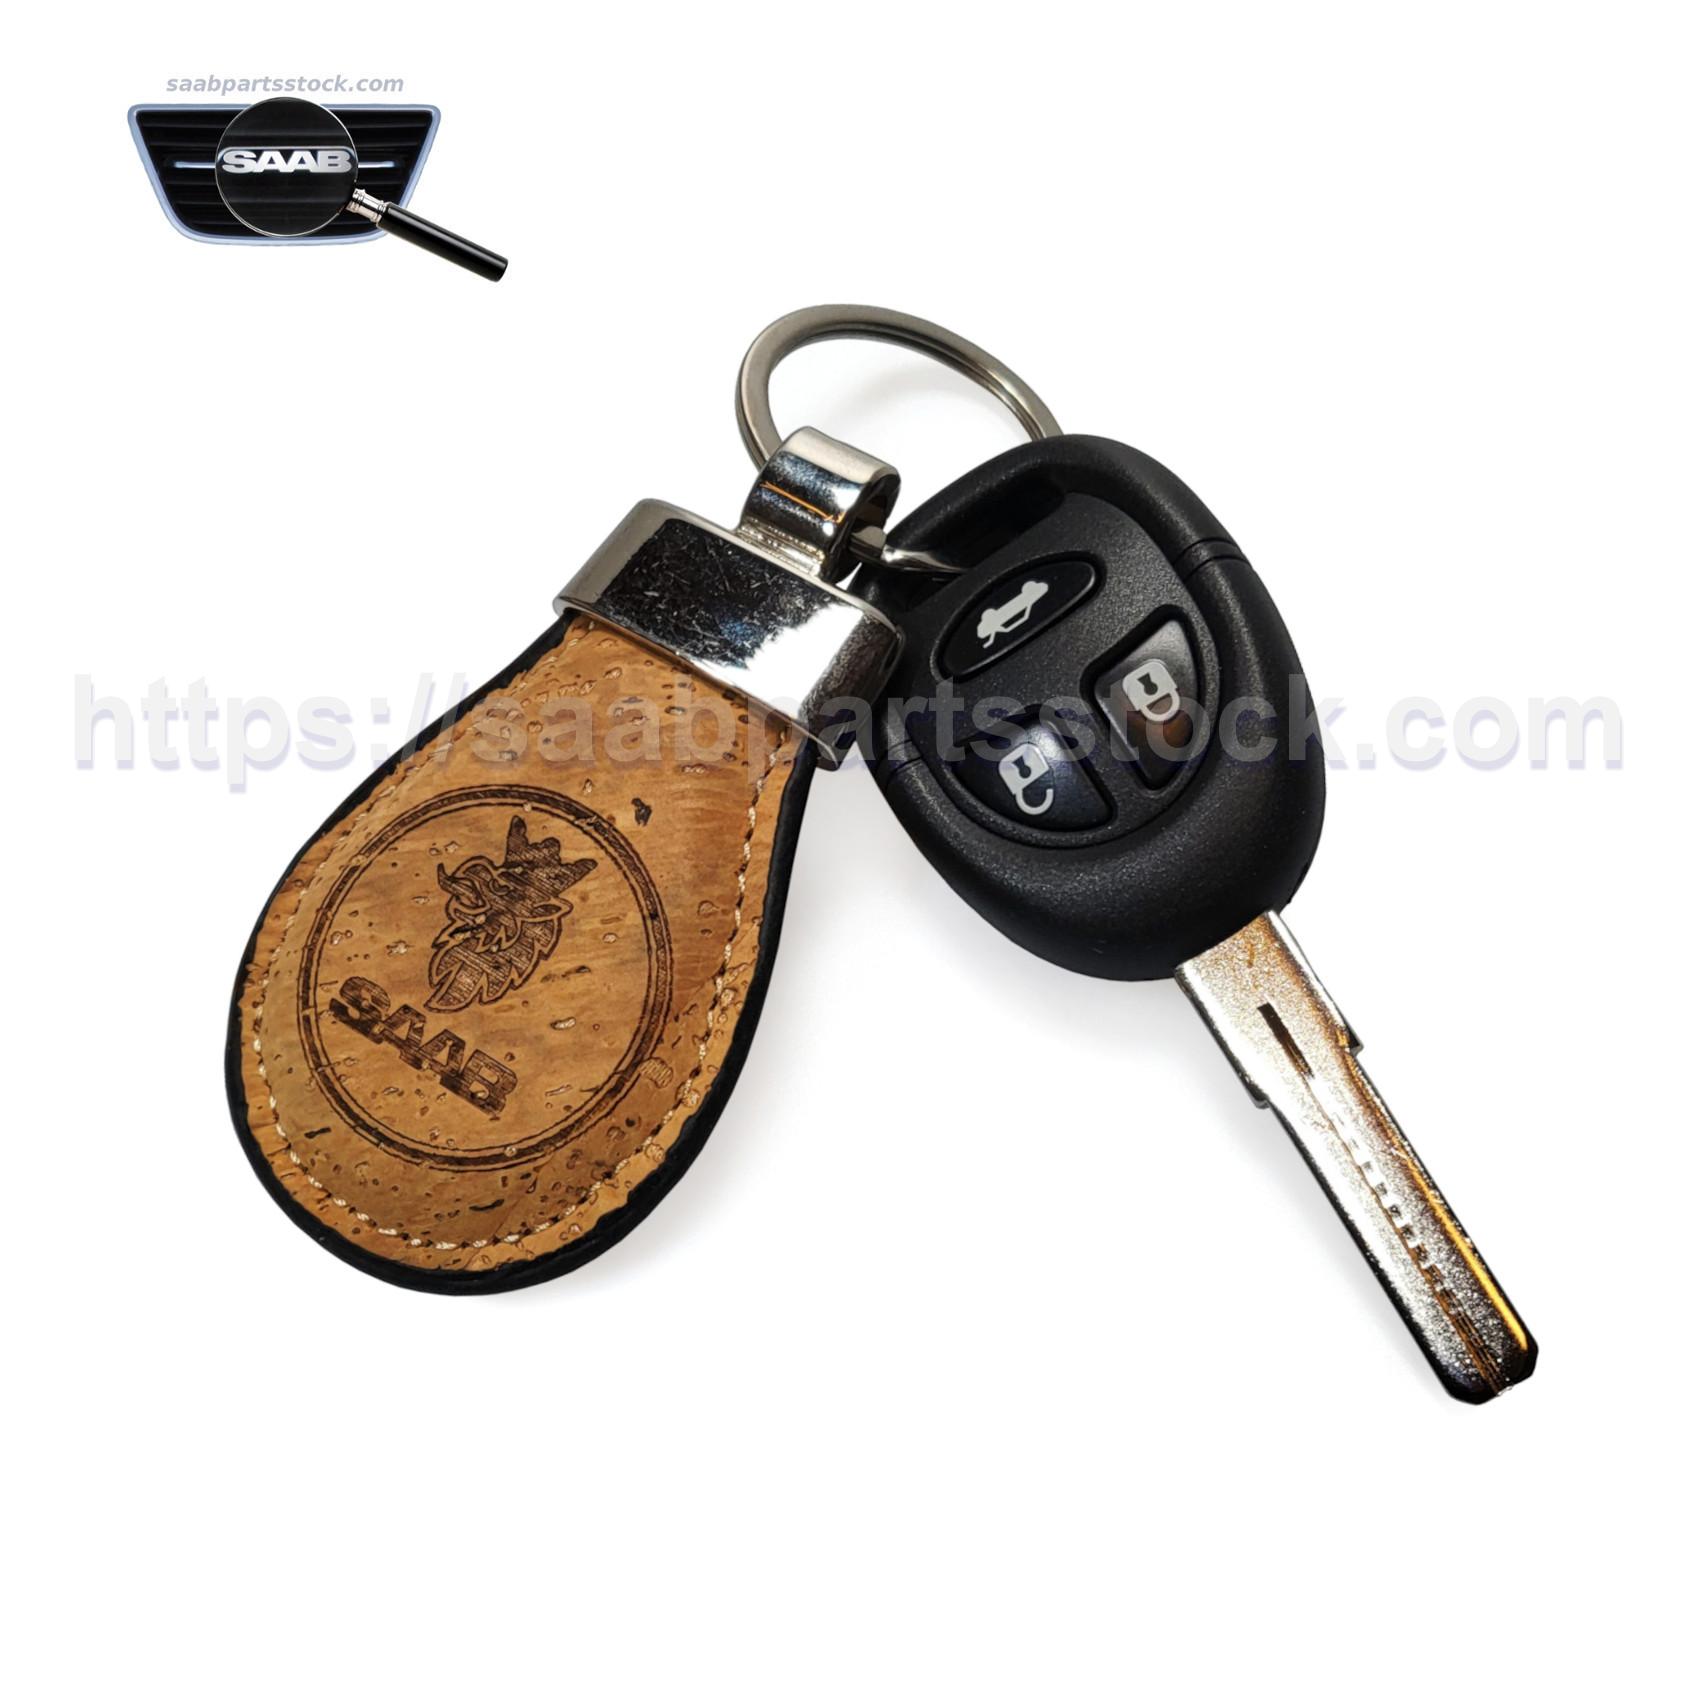 SAAB Key Ring Made of Natural Cork with Griffin Logotype